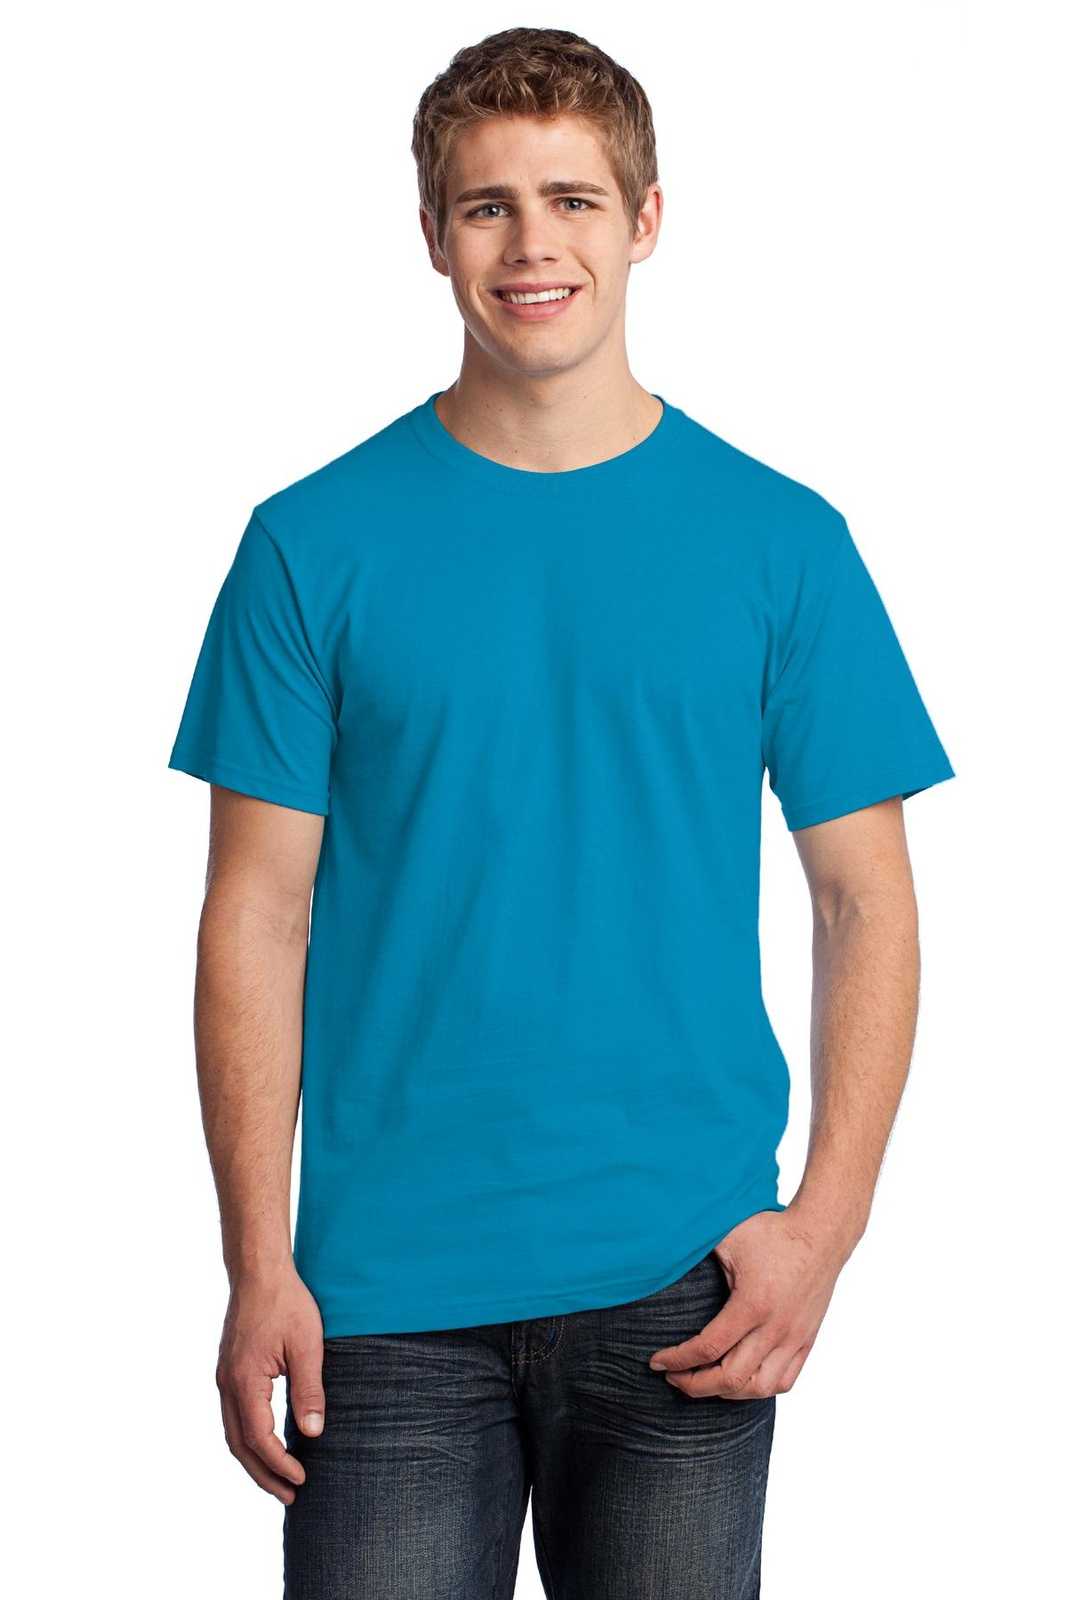 Fruit of the Loom 3930 HD Cotton 100% Cotton T-Shirt - Pacific Blue - HIT a Double